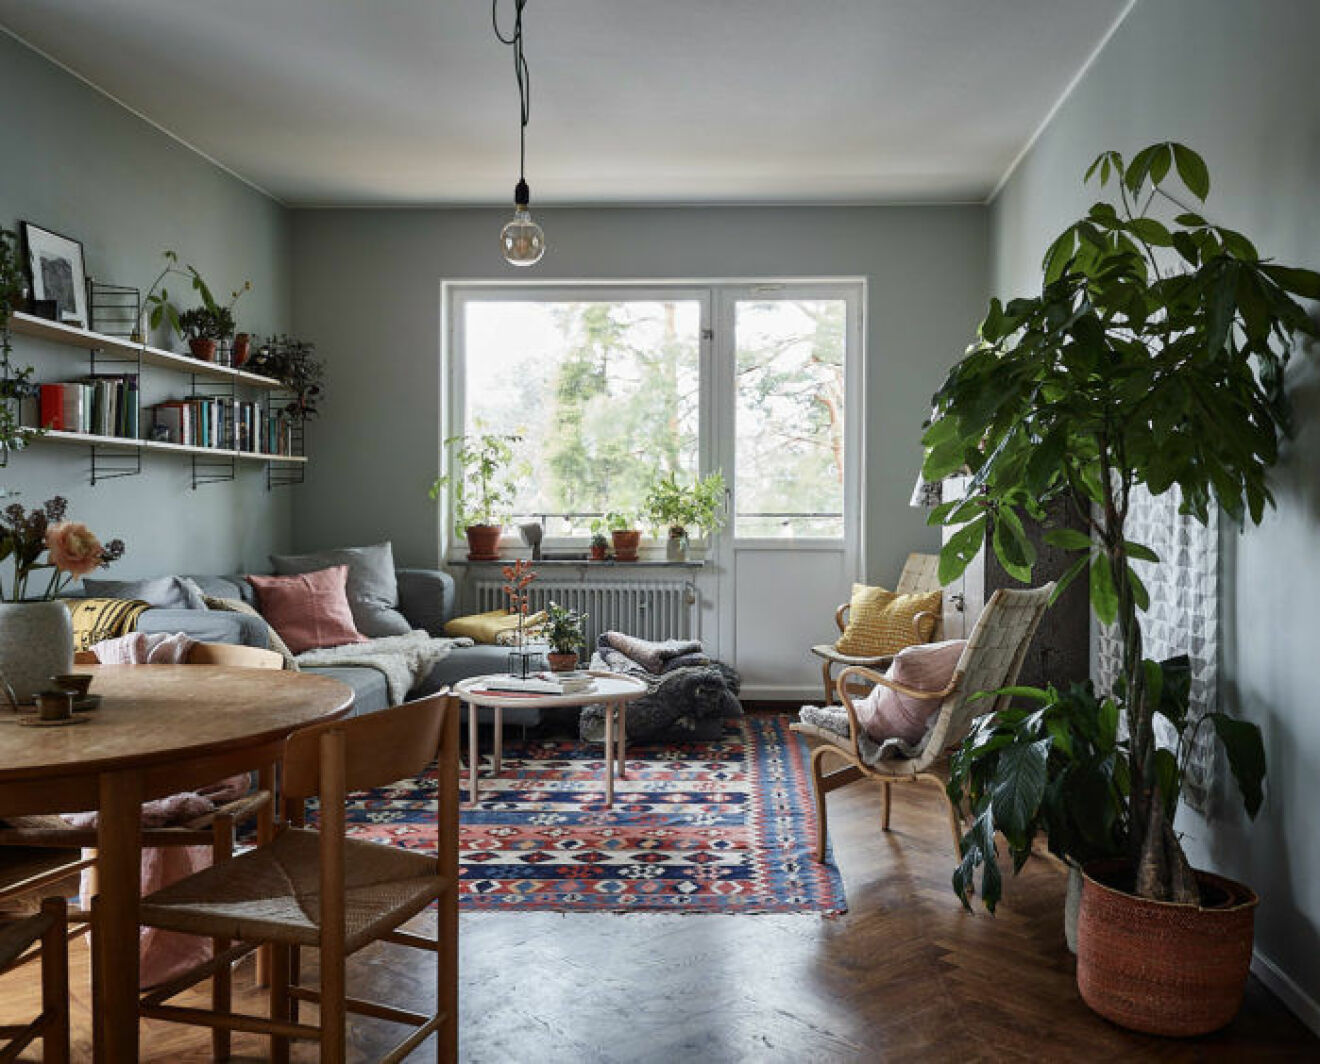 Livingroom with grey painted walls, colourful rug and green plants and indoor trees.